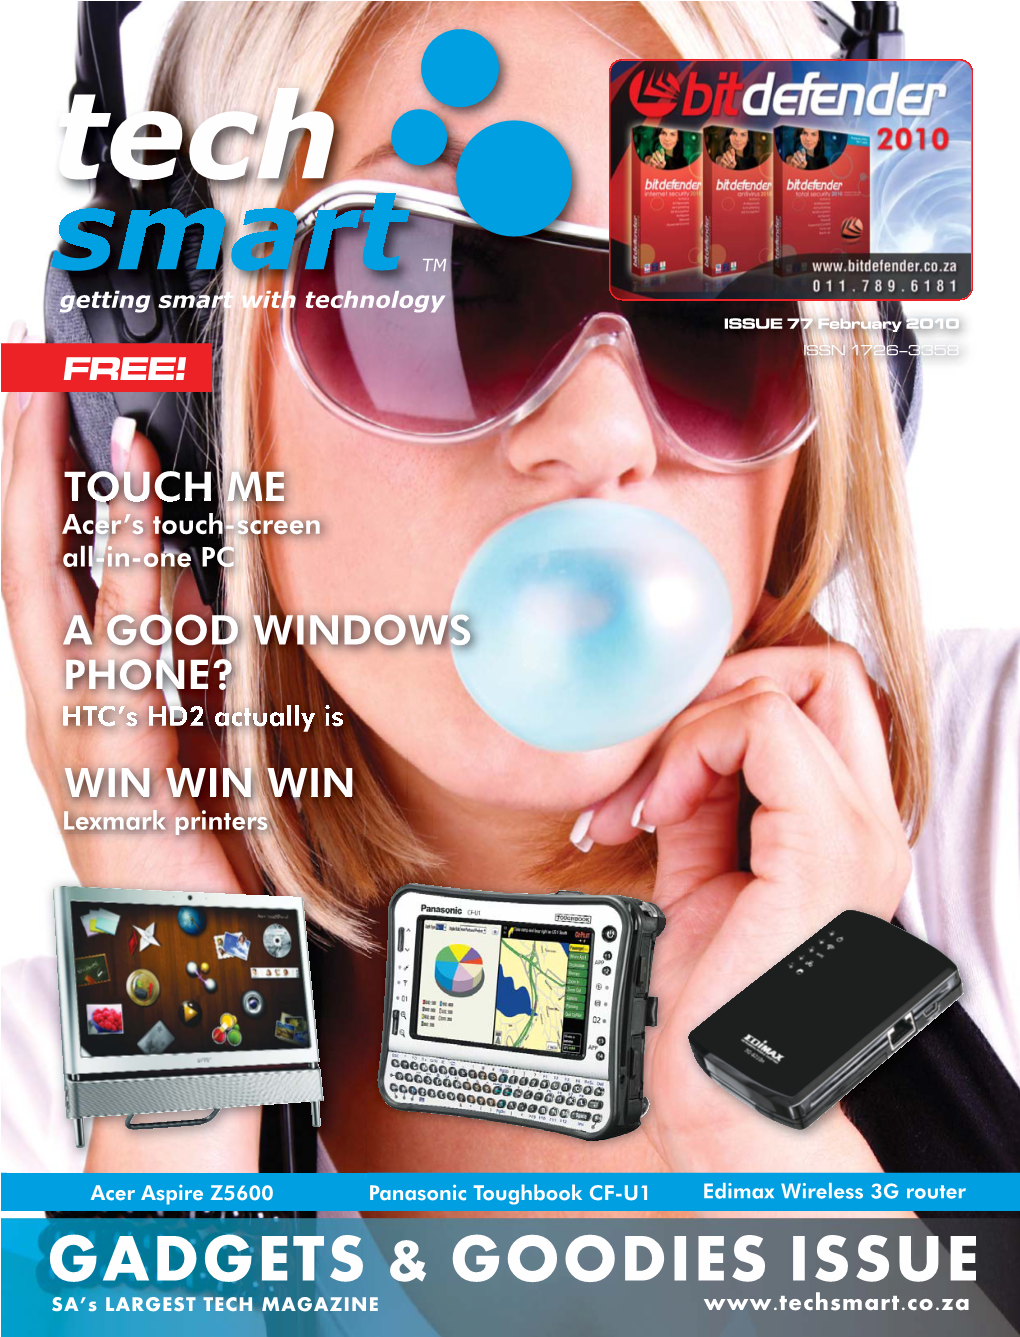 Gadgets & Goodies Issue